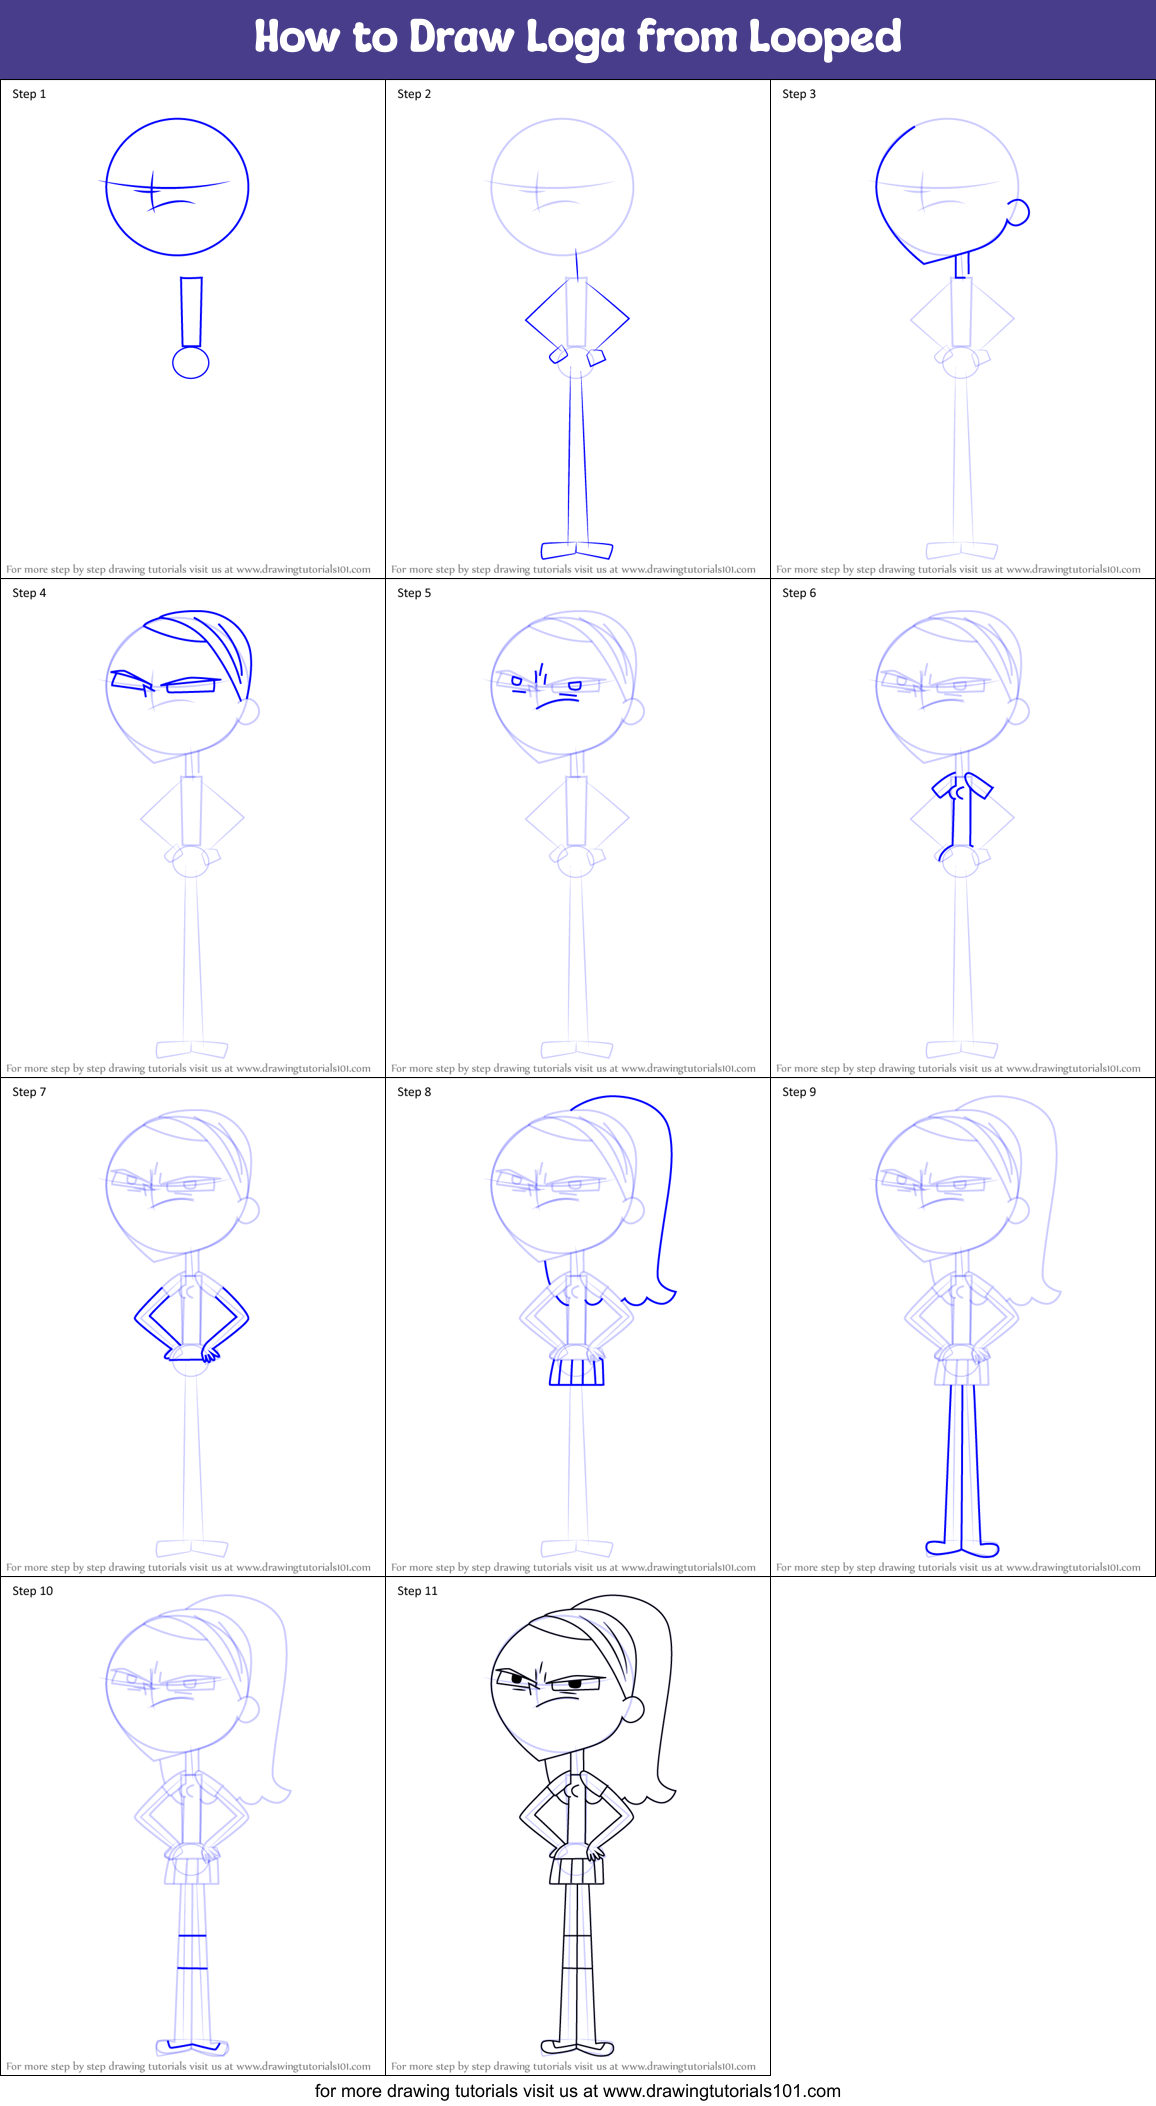 How To Draw Loga From Looped Printable Step By Step Drawing Sheet 5403